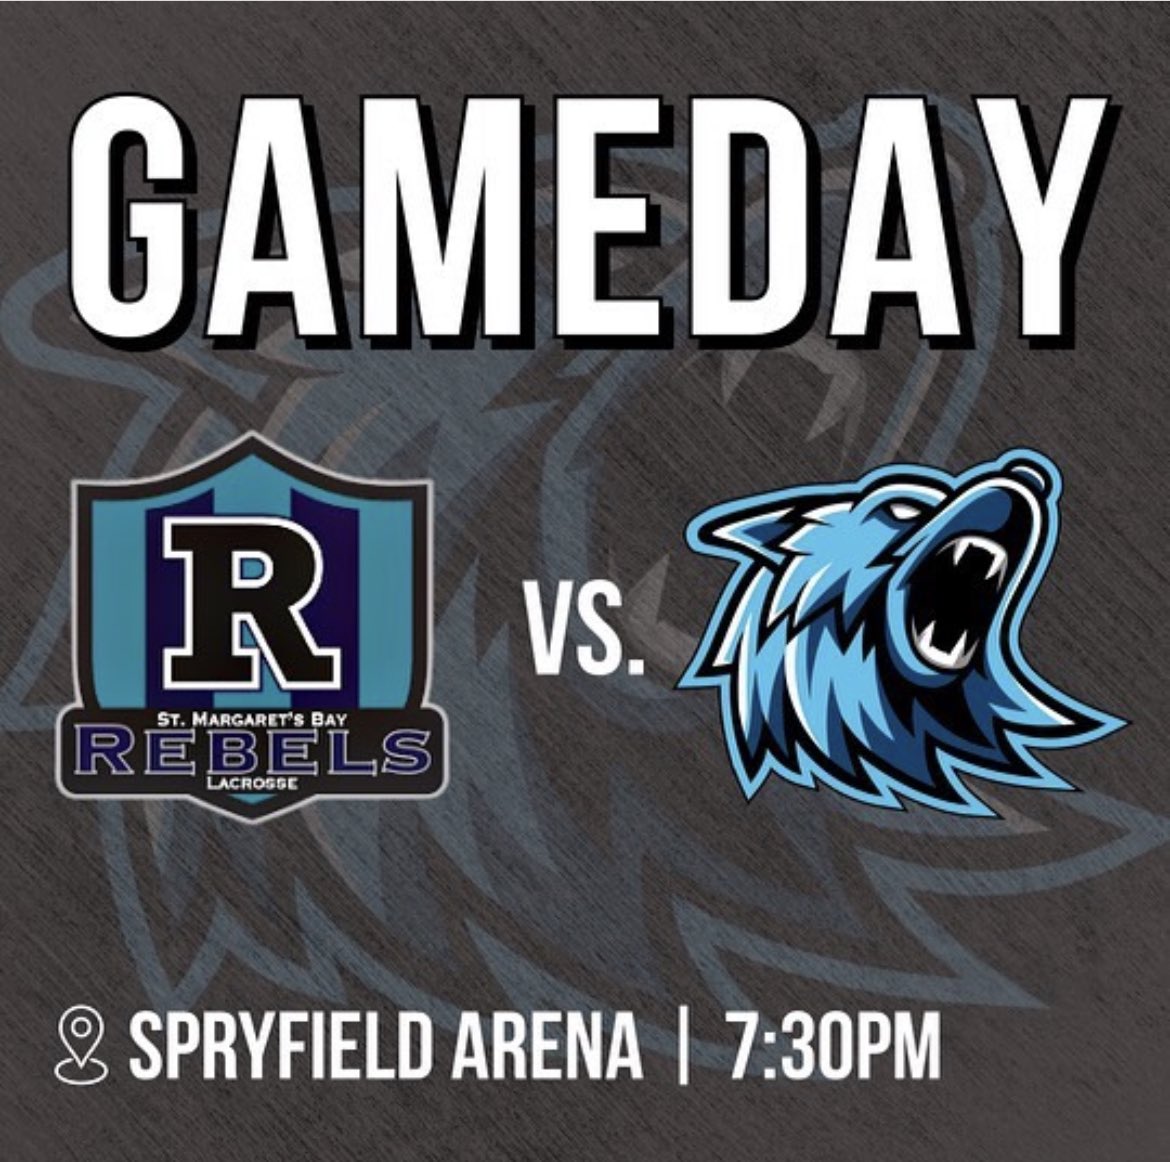 The boys are back in action tonight in Spryfield to take on the Rebels! #runwiththewolves